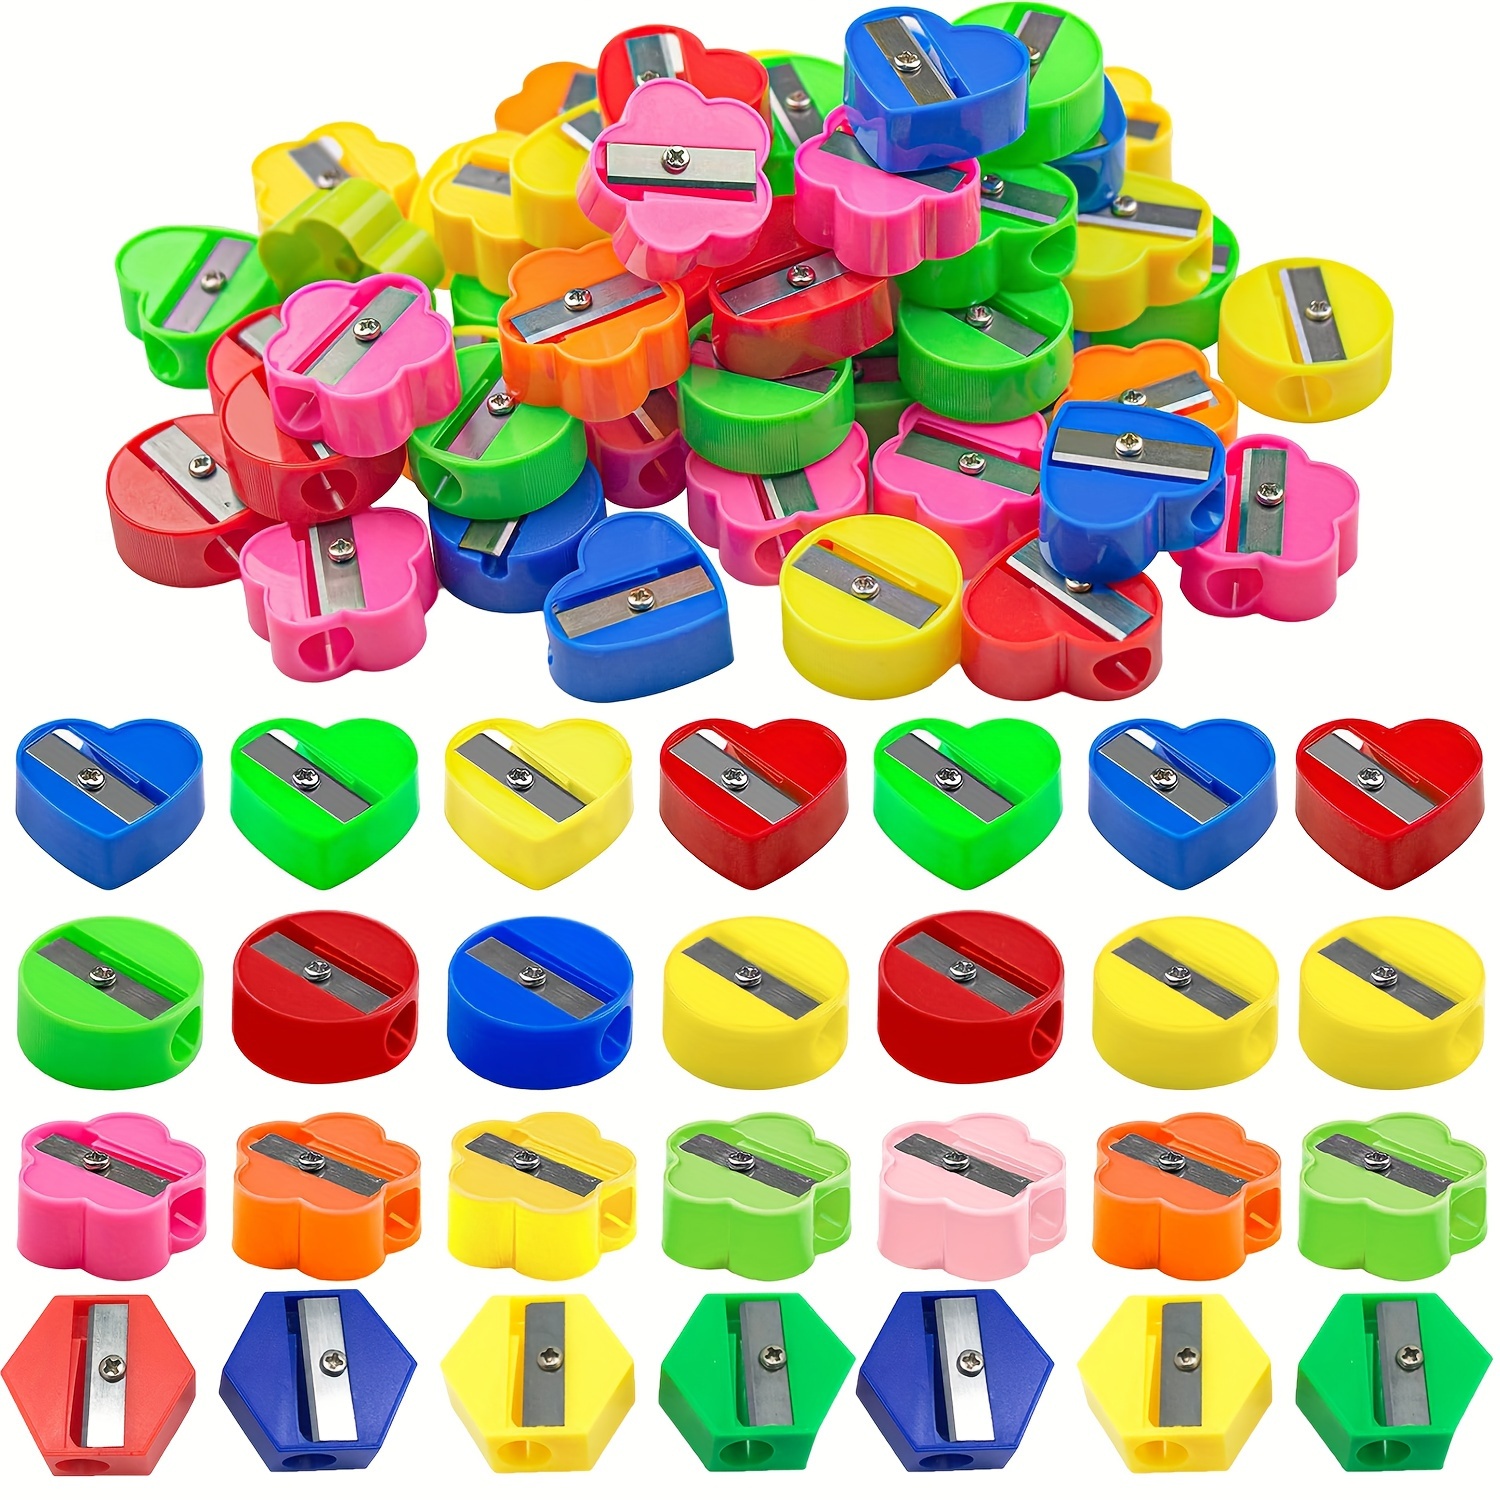 

Colorful Geometric Pencil Sharpeners 100pcs - Mini Handheld, Perfect For Party Favors, Goodie Bags, Prizes & School Supplies, Assorted Styles, Ideal For Ages 14+ (random Colors)